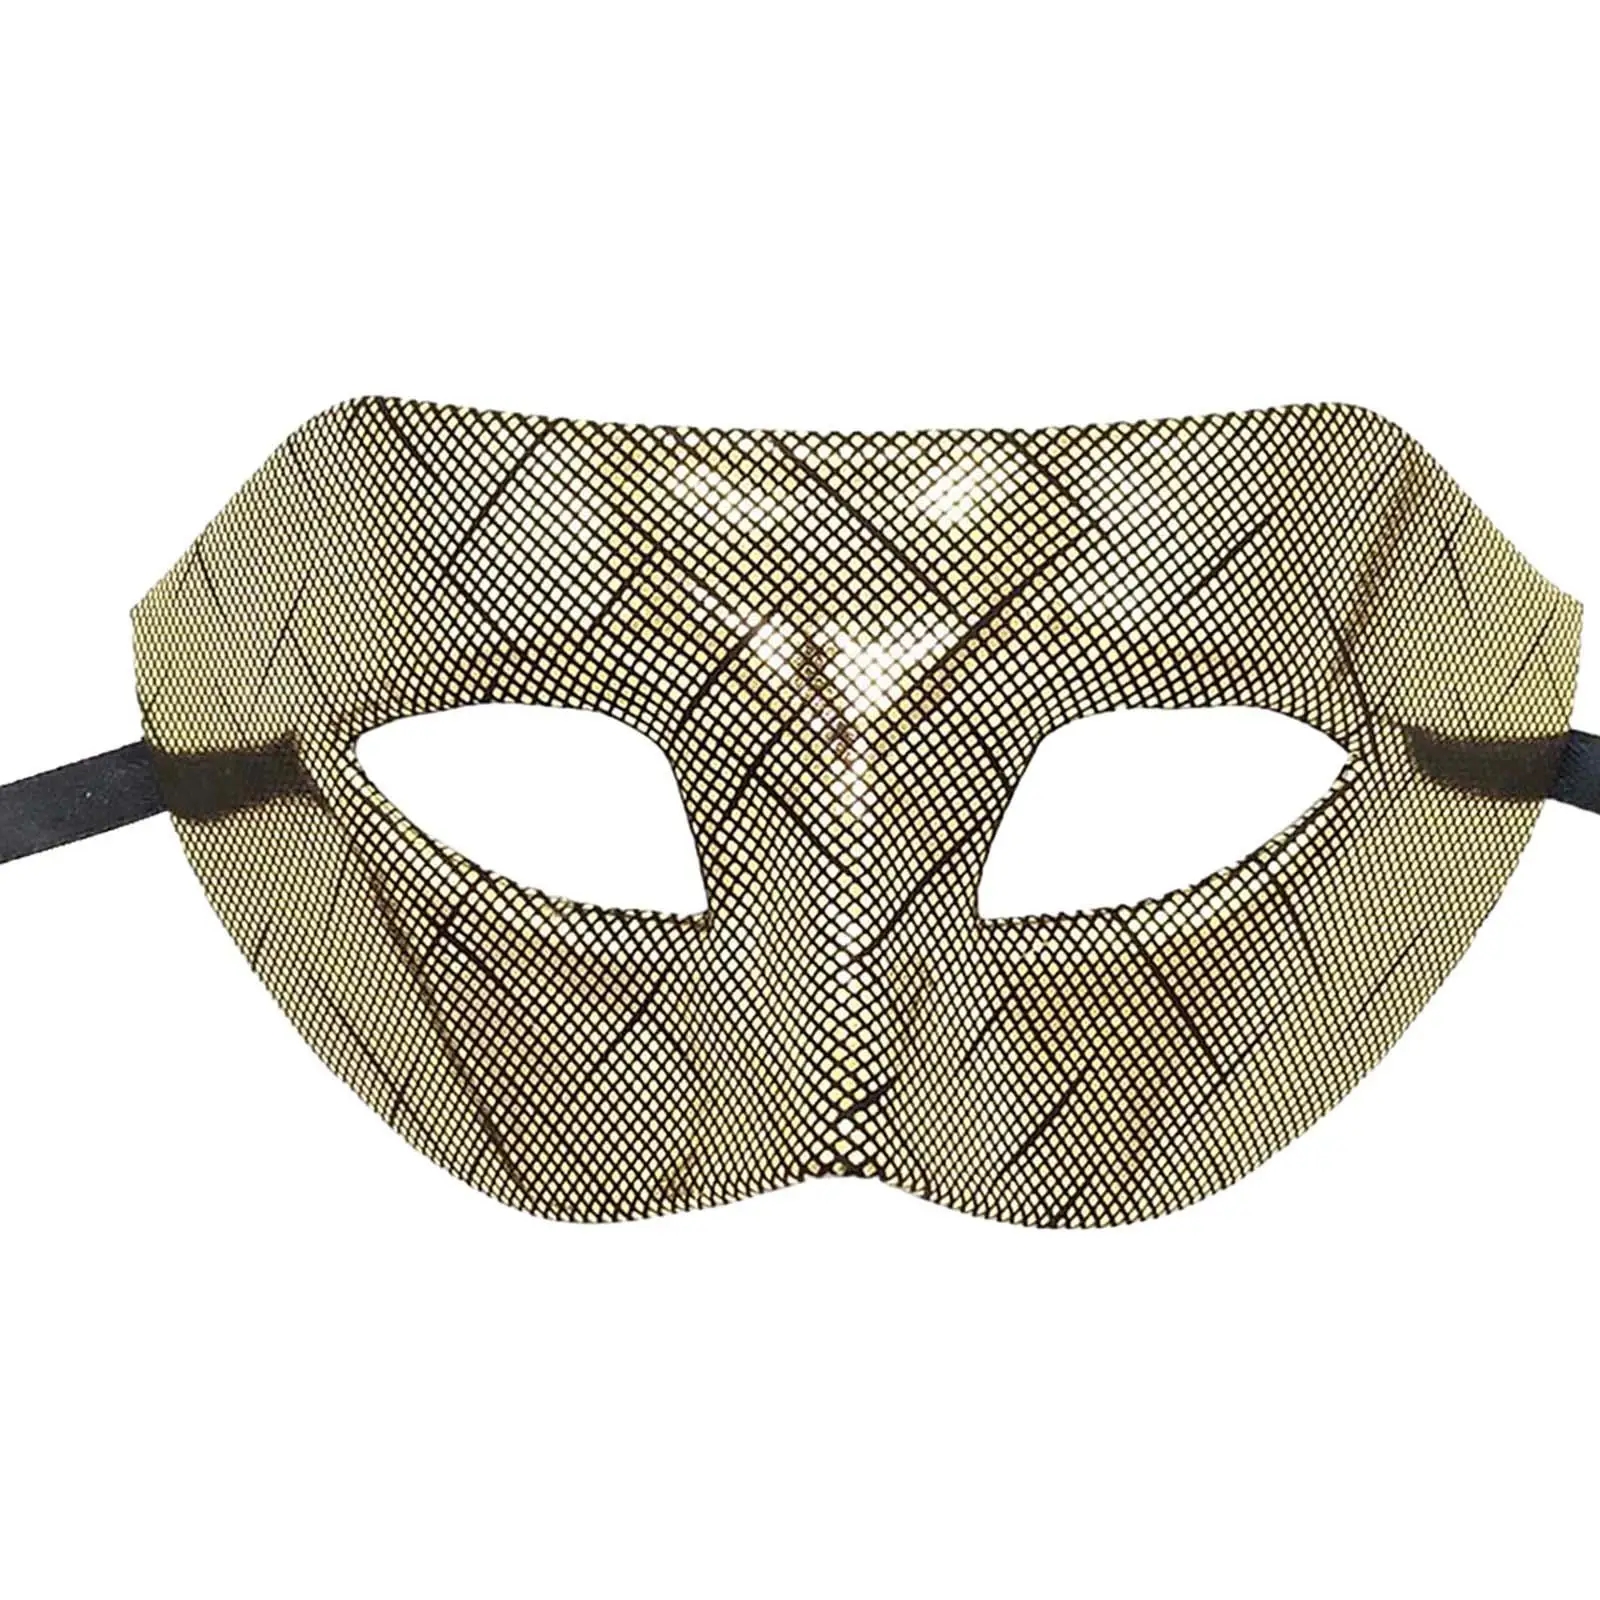 Masquerade Mask Prom Mask Half Face Mask for Carnival Christmas Halloween